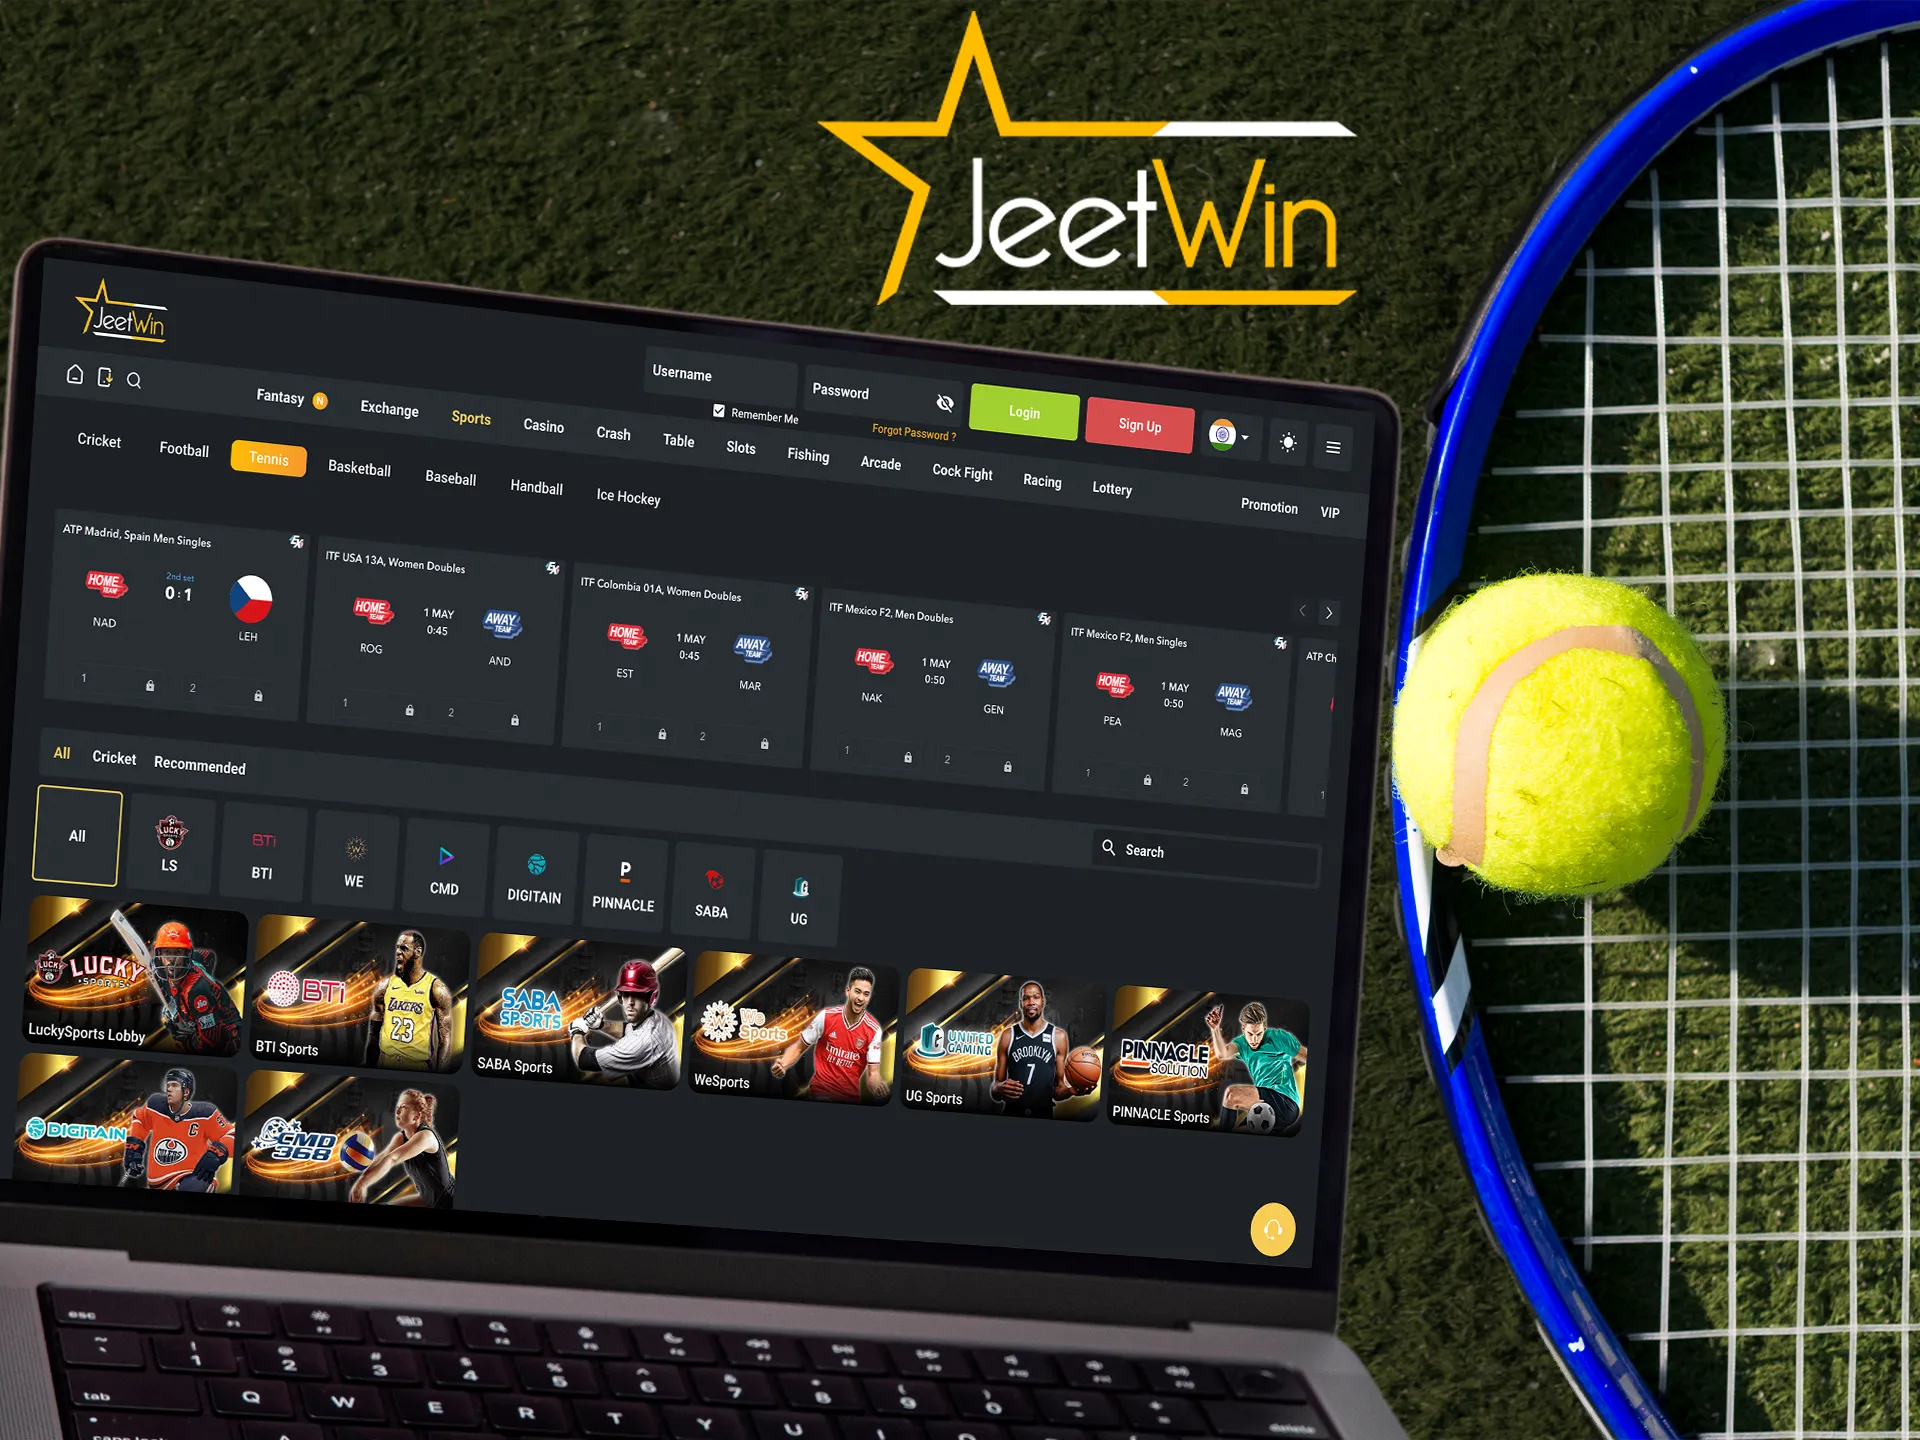 Make the right choice in tennis at JeetWin Casino.